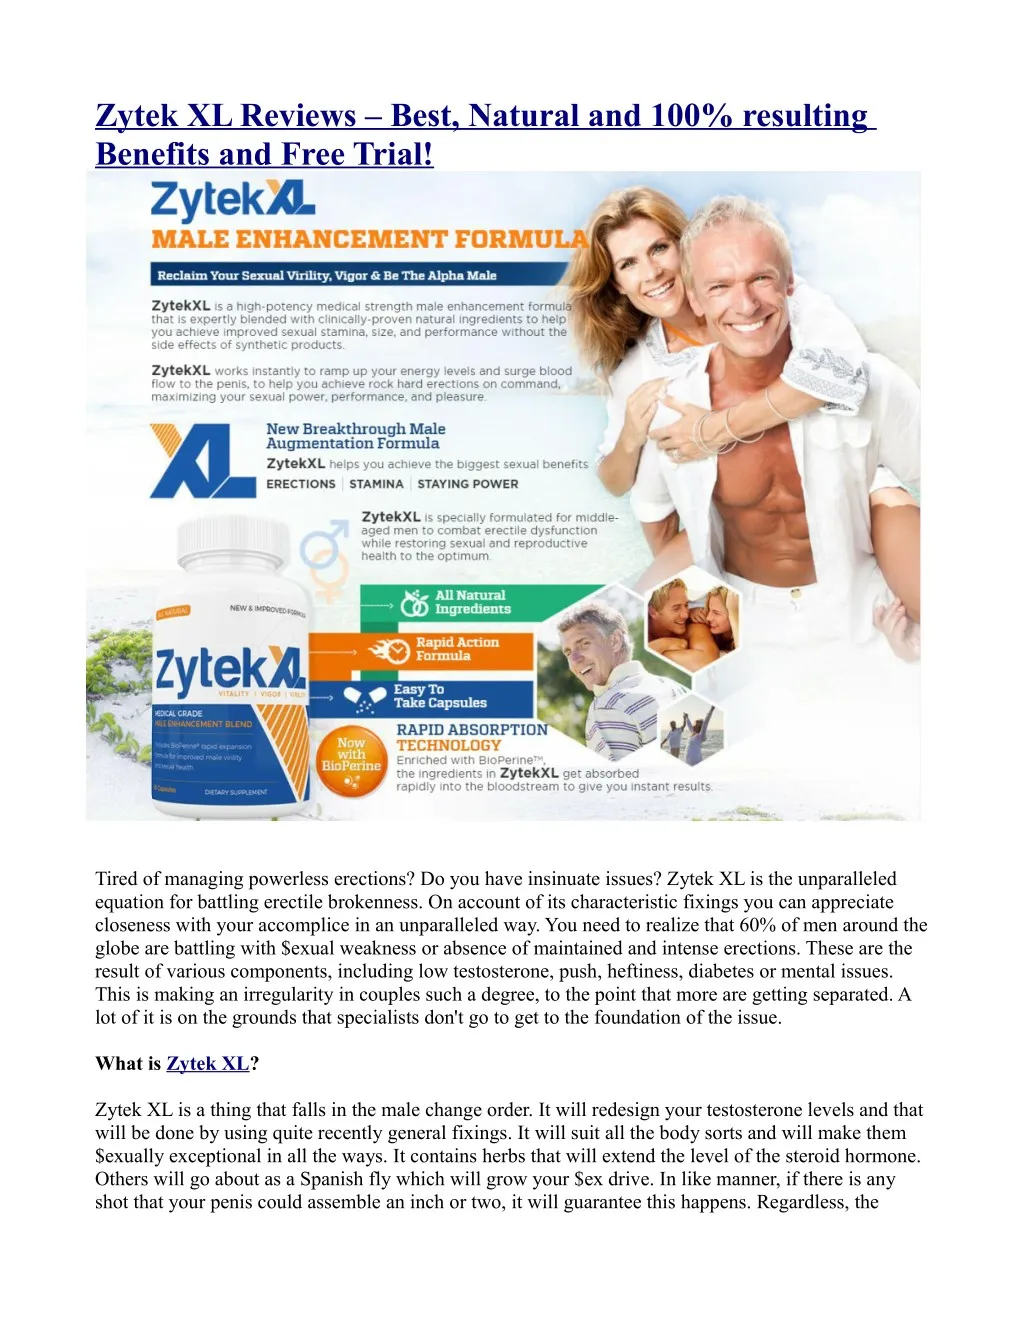 zytek xl reviews best natural and 100 resulting